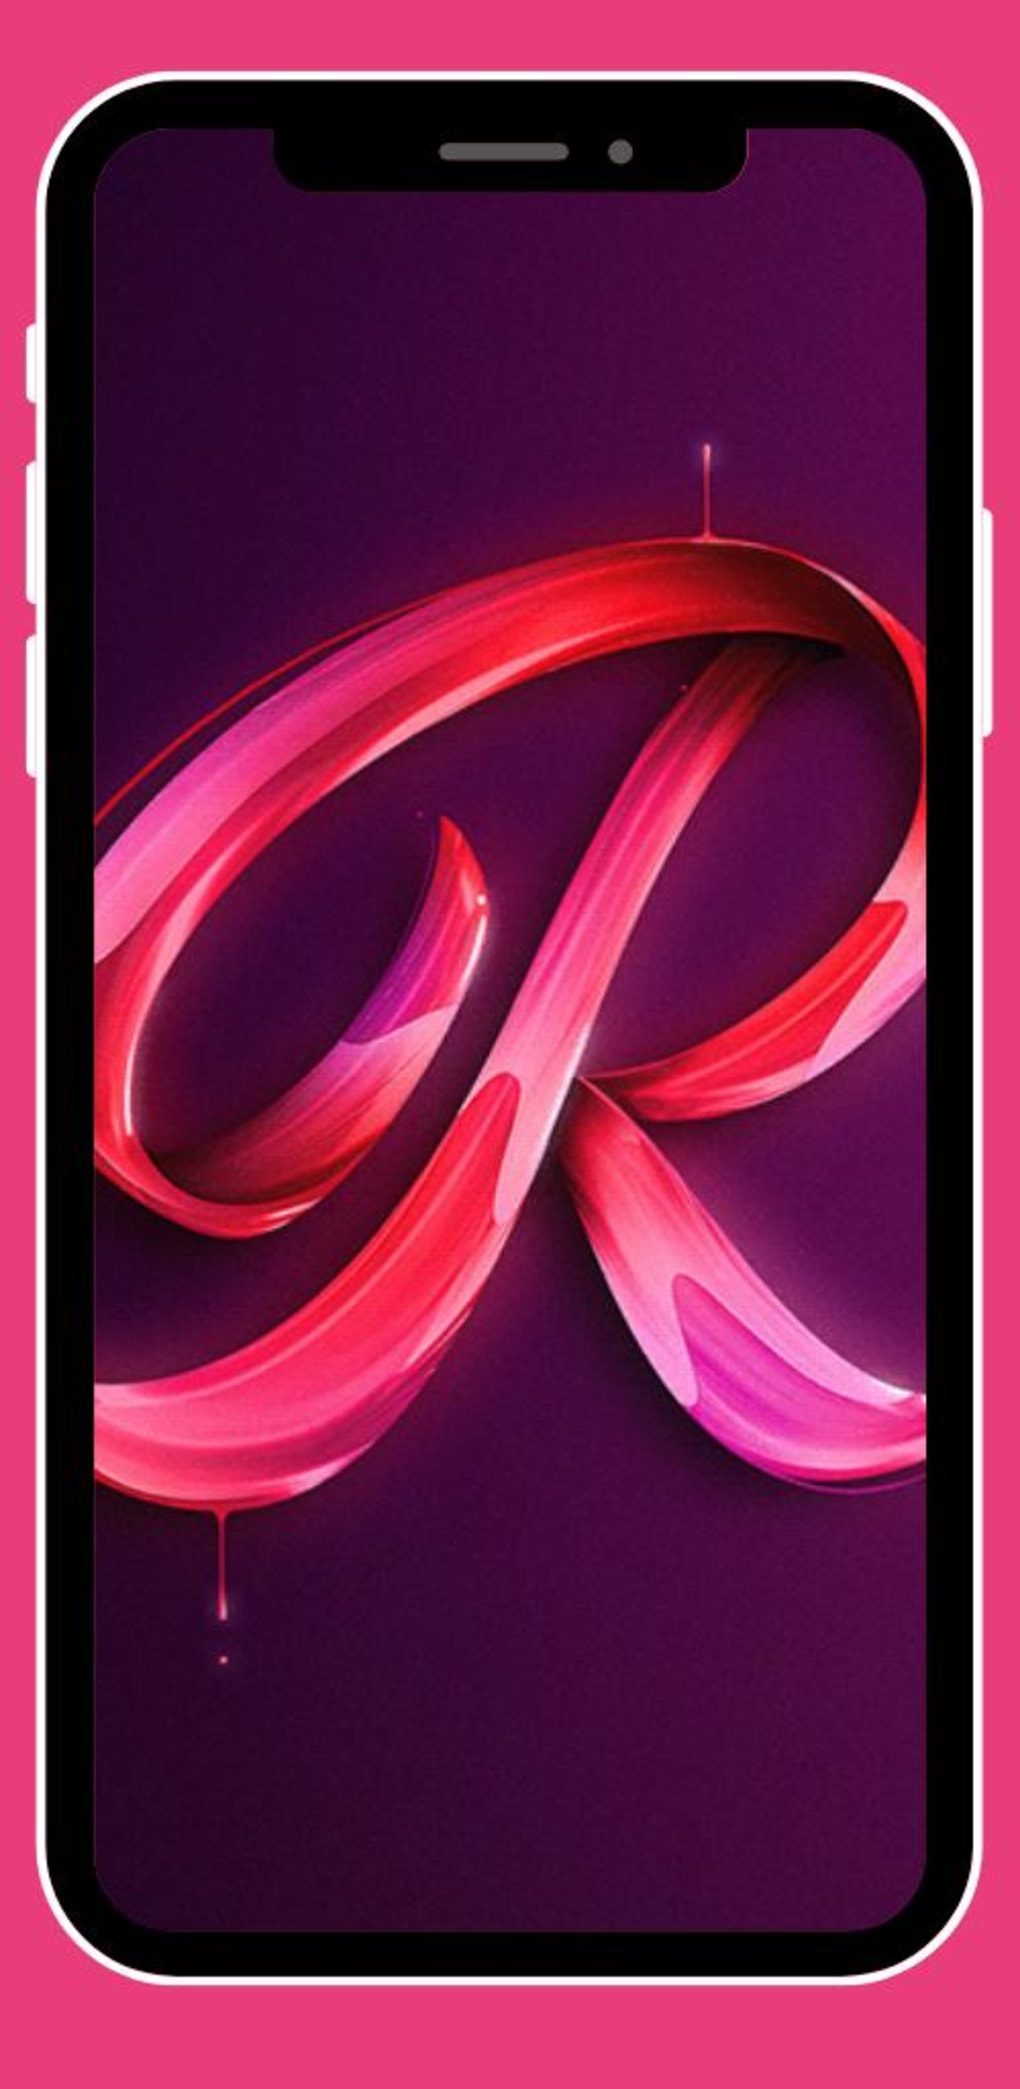 R wallpaper _ r letter hd for Android - Download